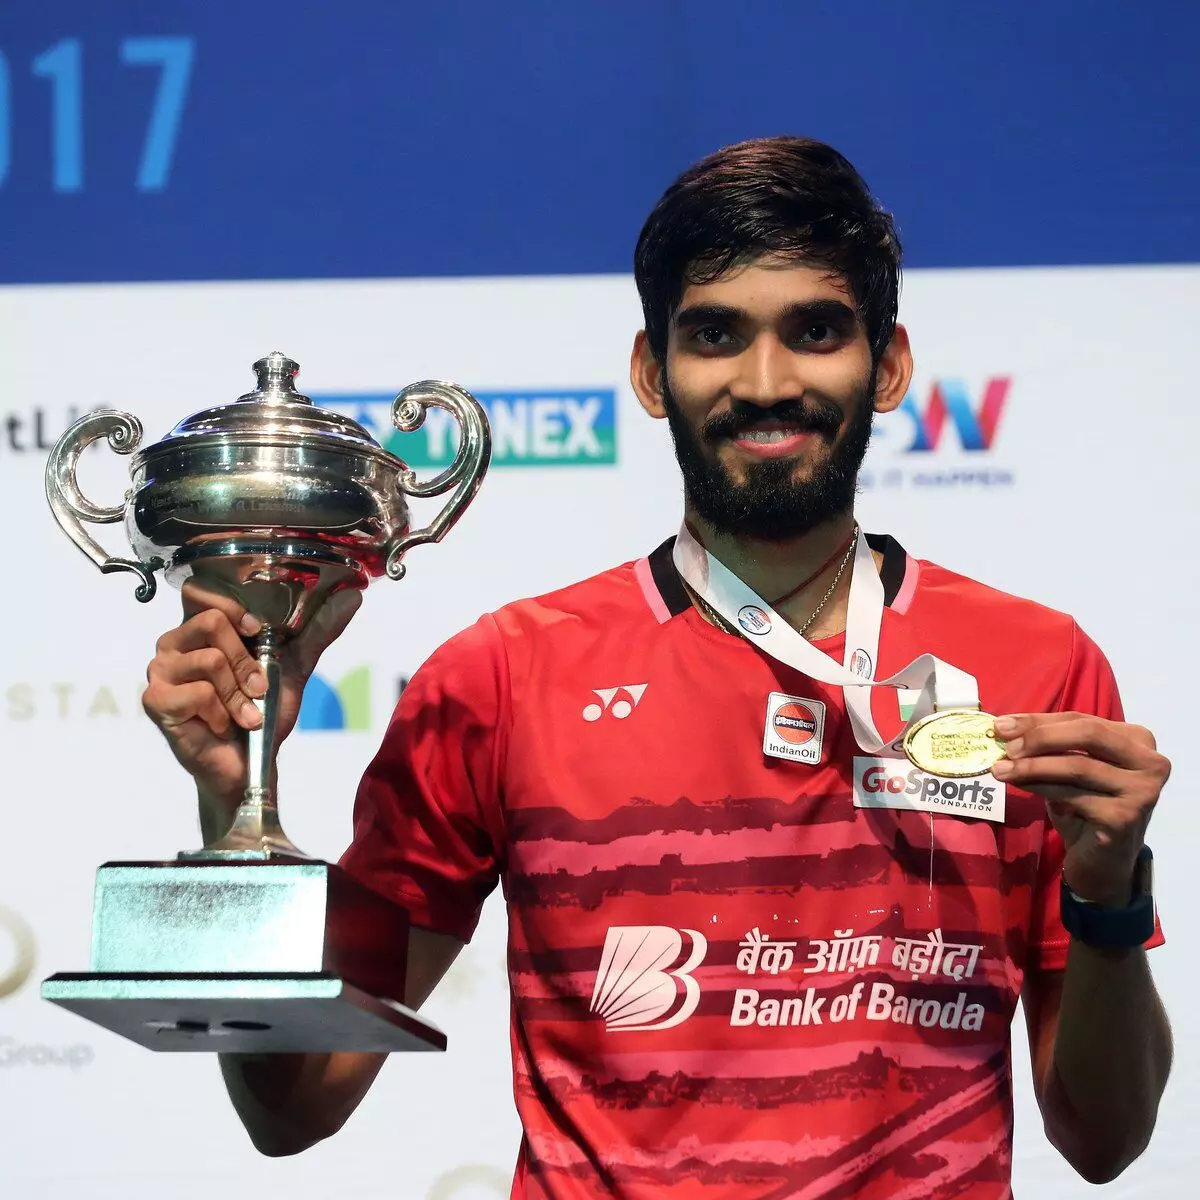 From World No. 1 to missing Tokyo Olympics berth — Can Srikanth Kidambi bounce back?